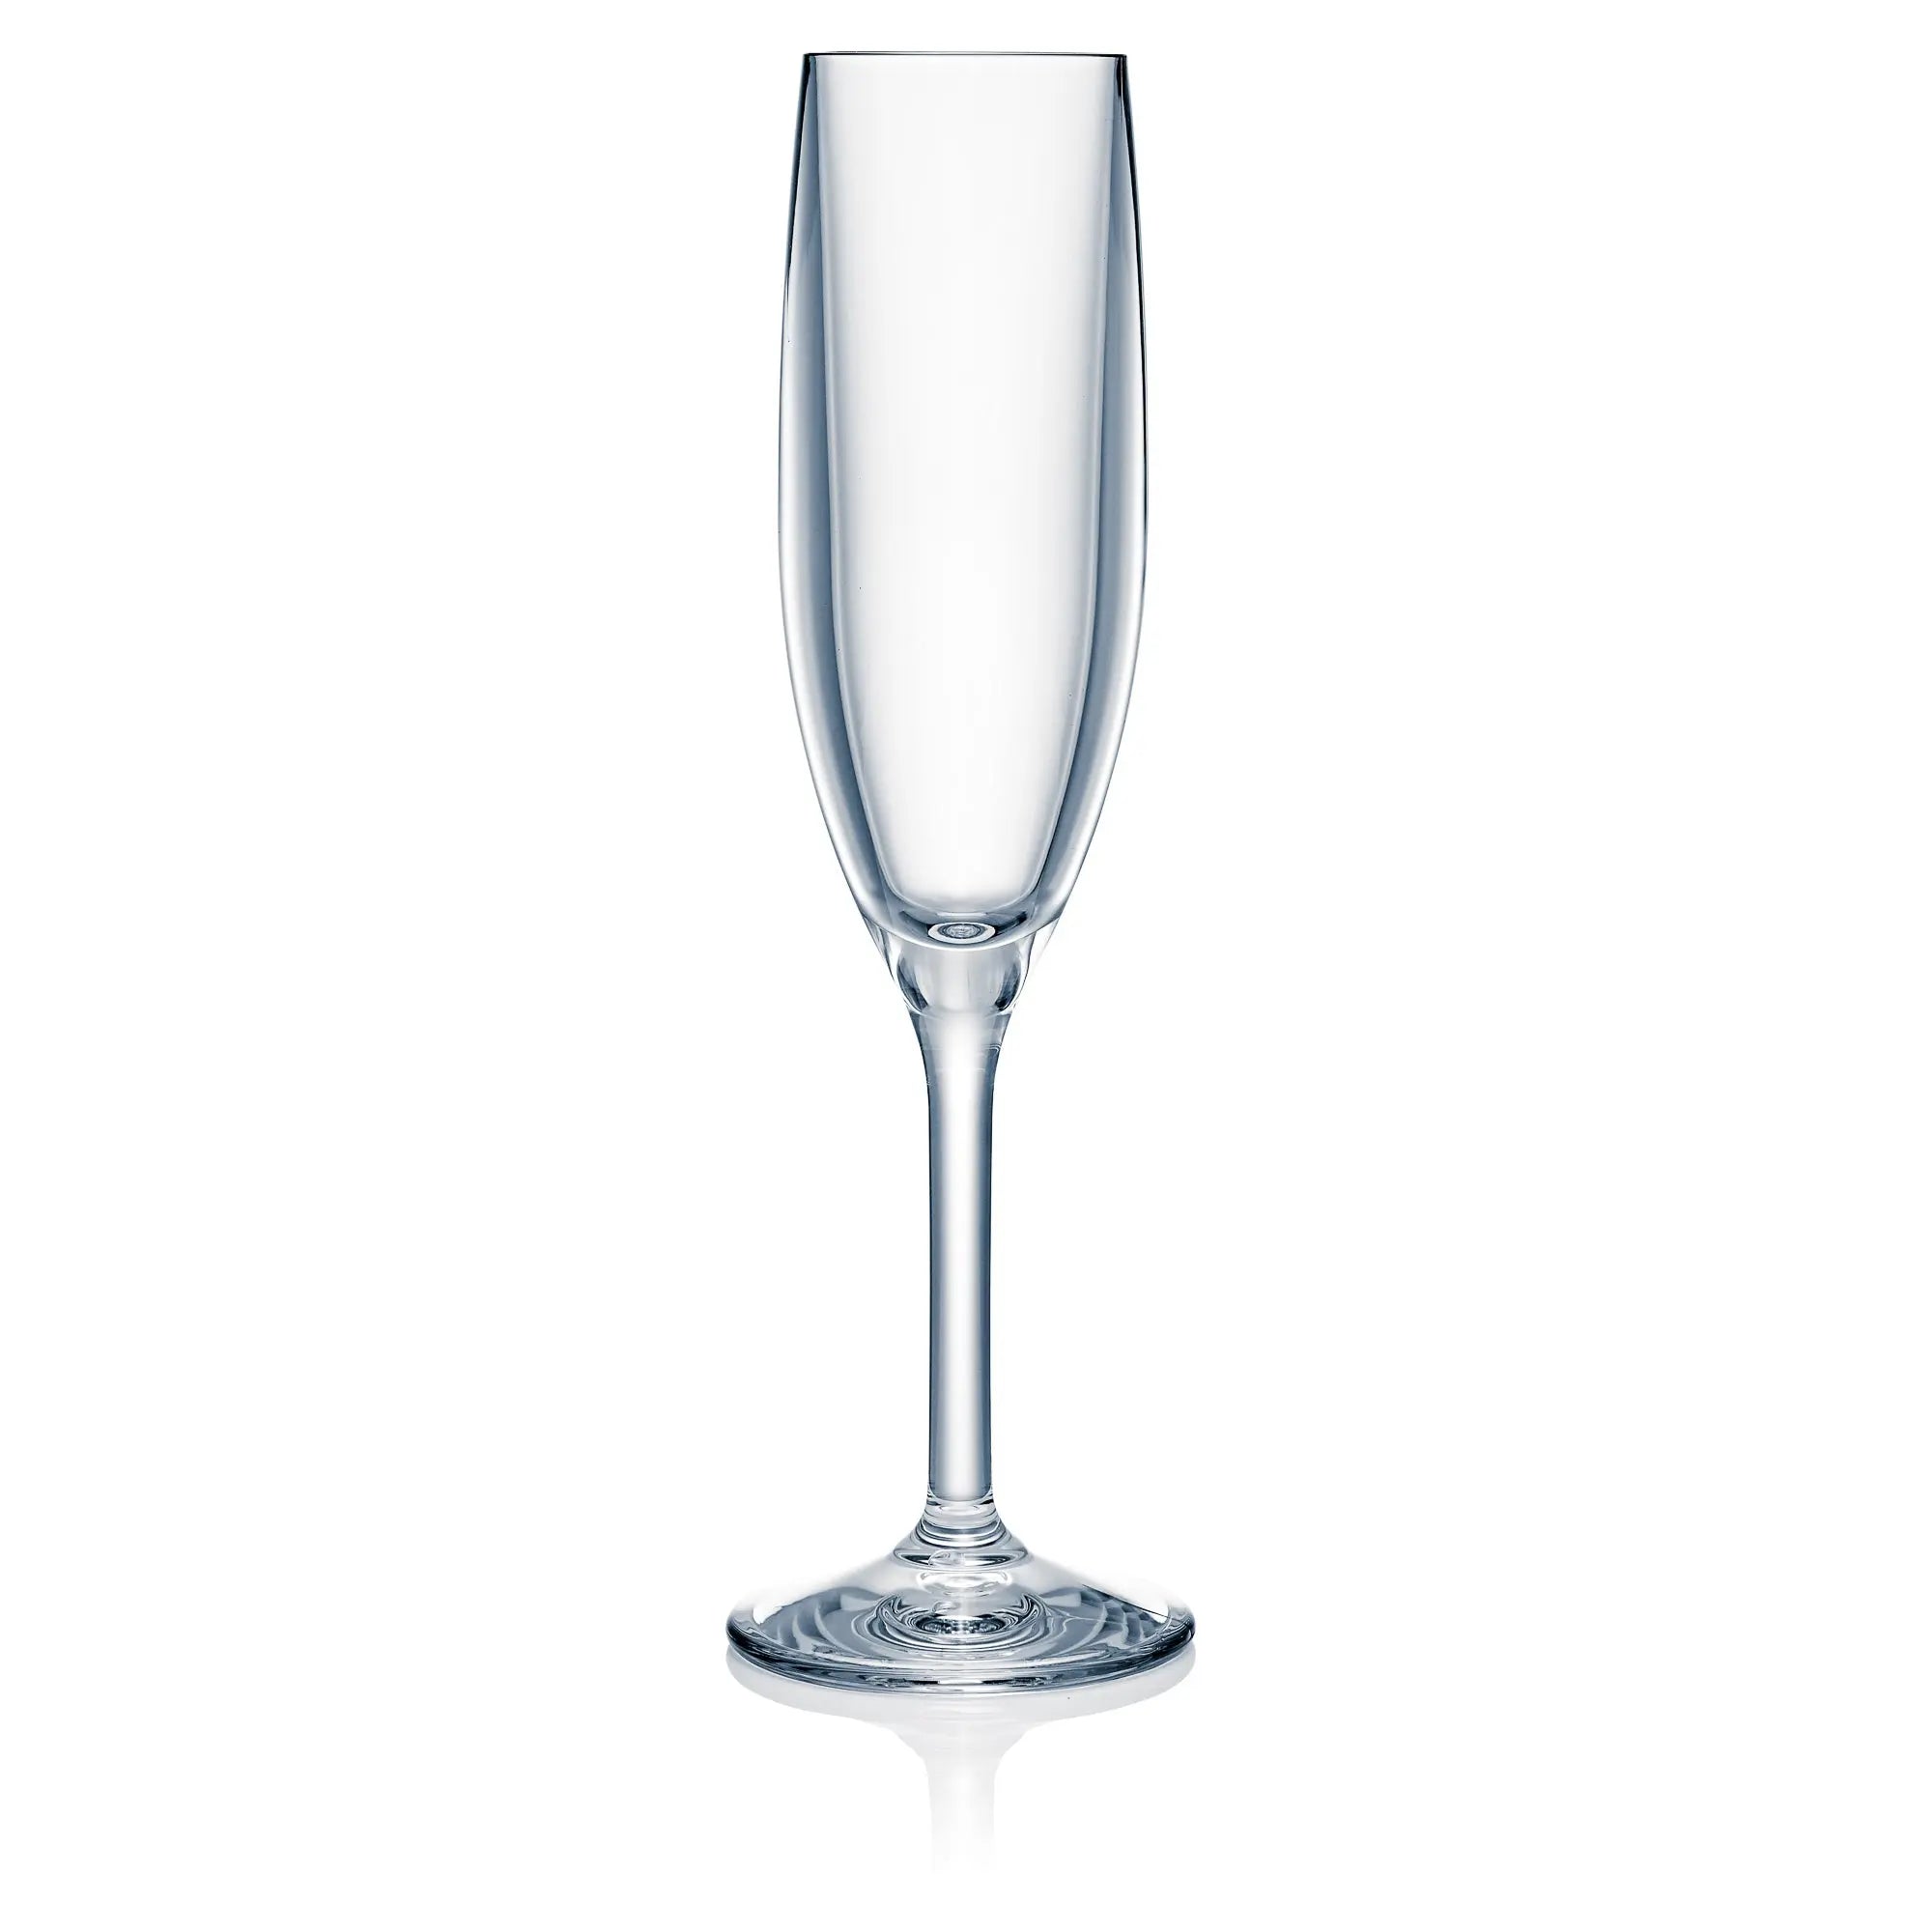 Strahl Design+Contemporary Champagne Flute (166ml) - N40250 Strahl